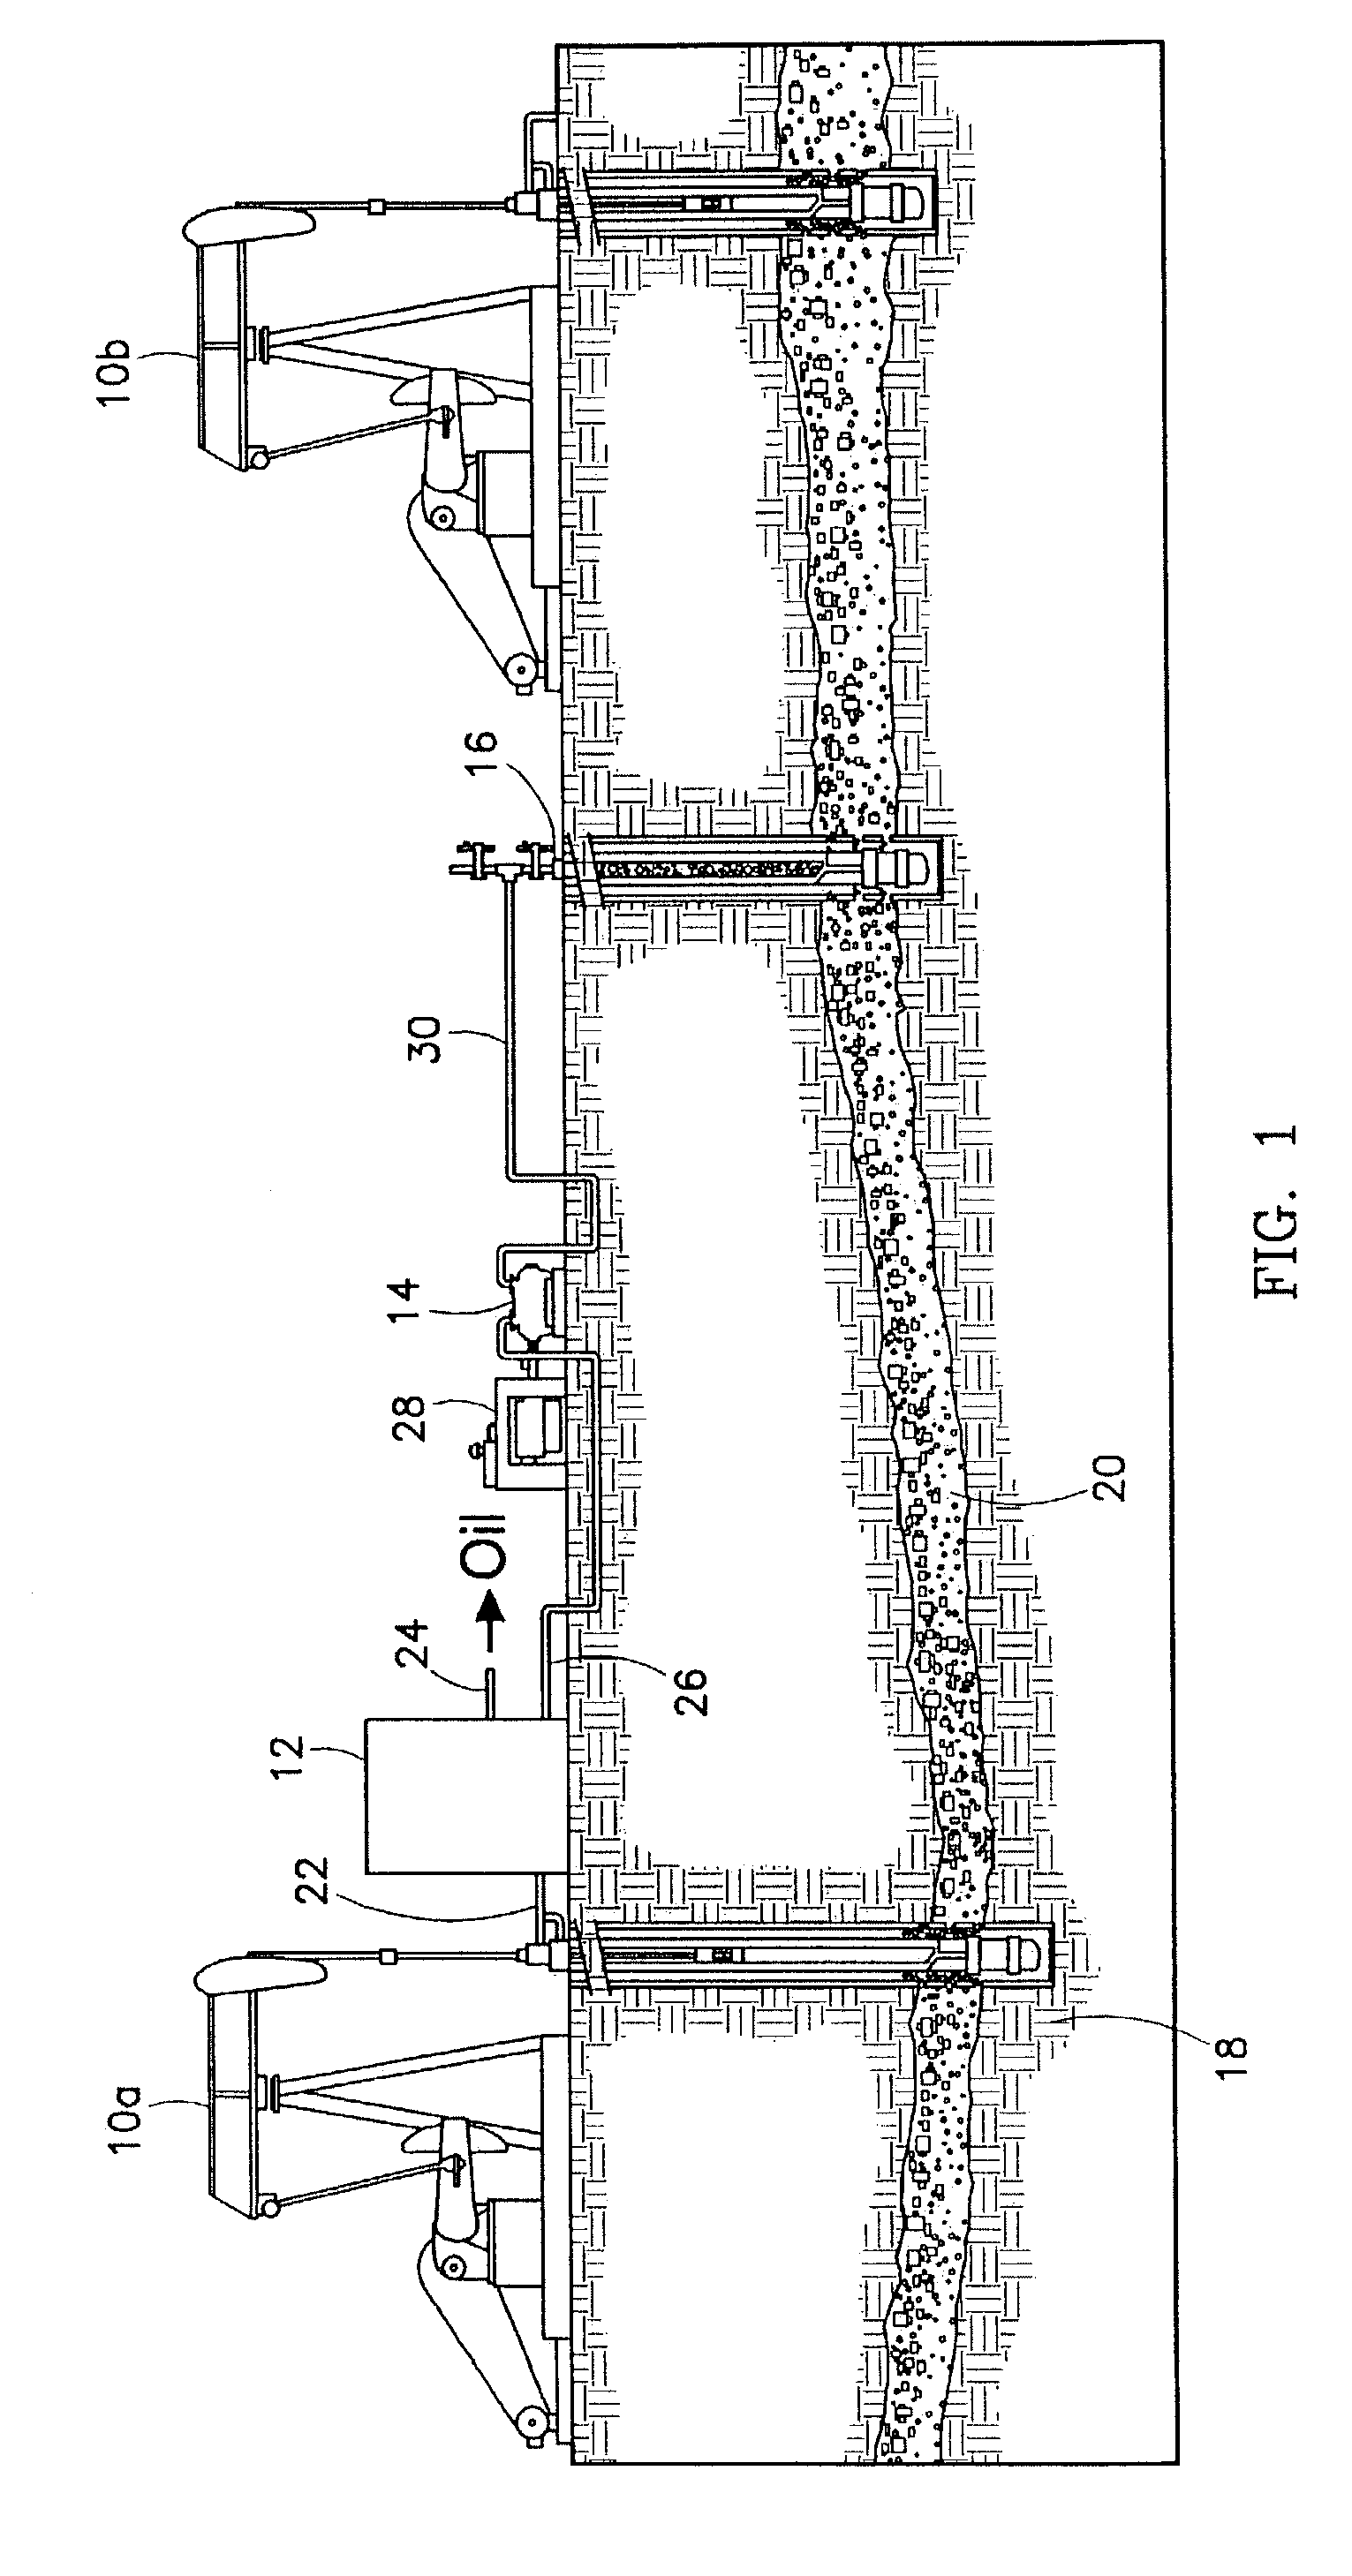 Material testing system for turbines